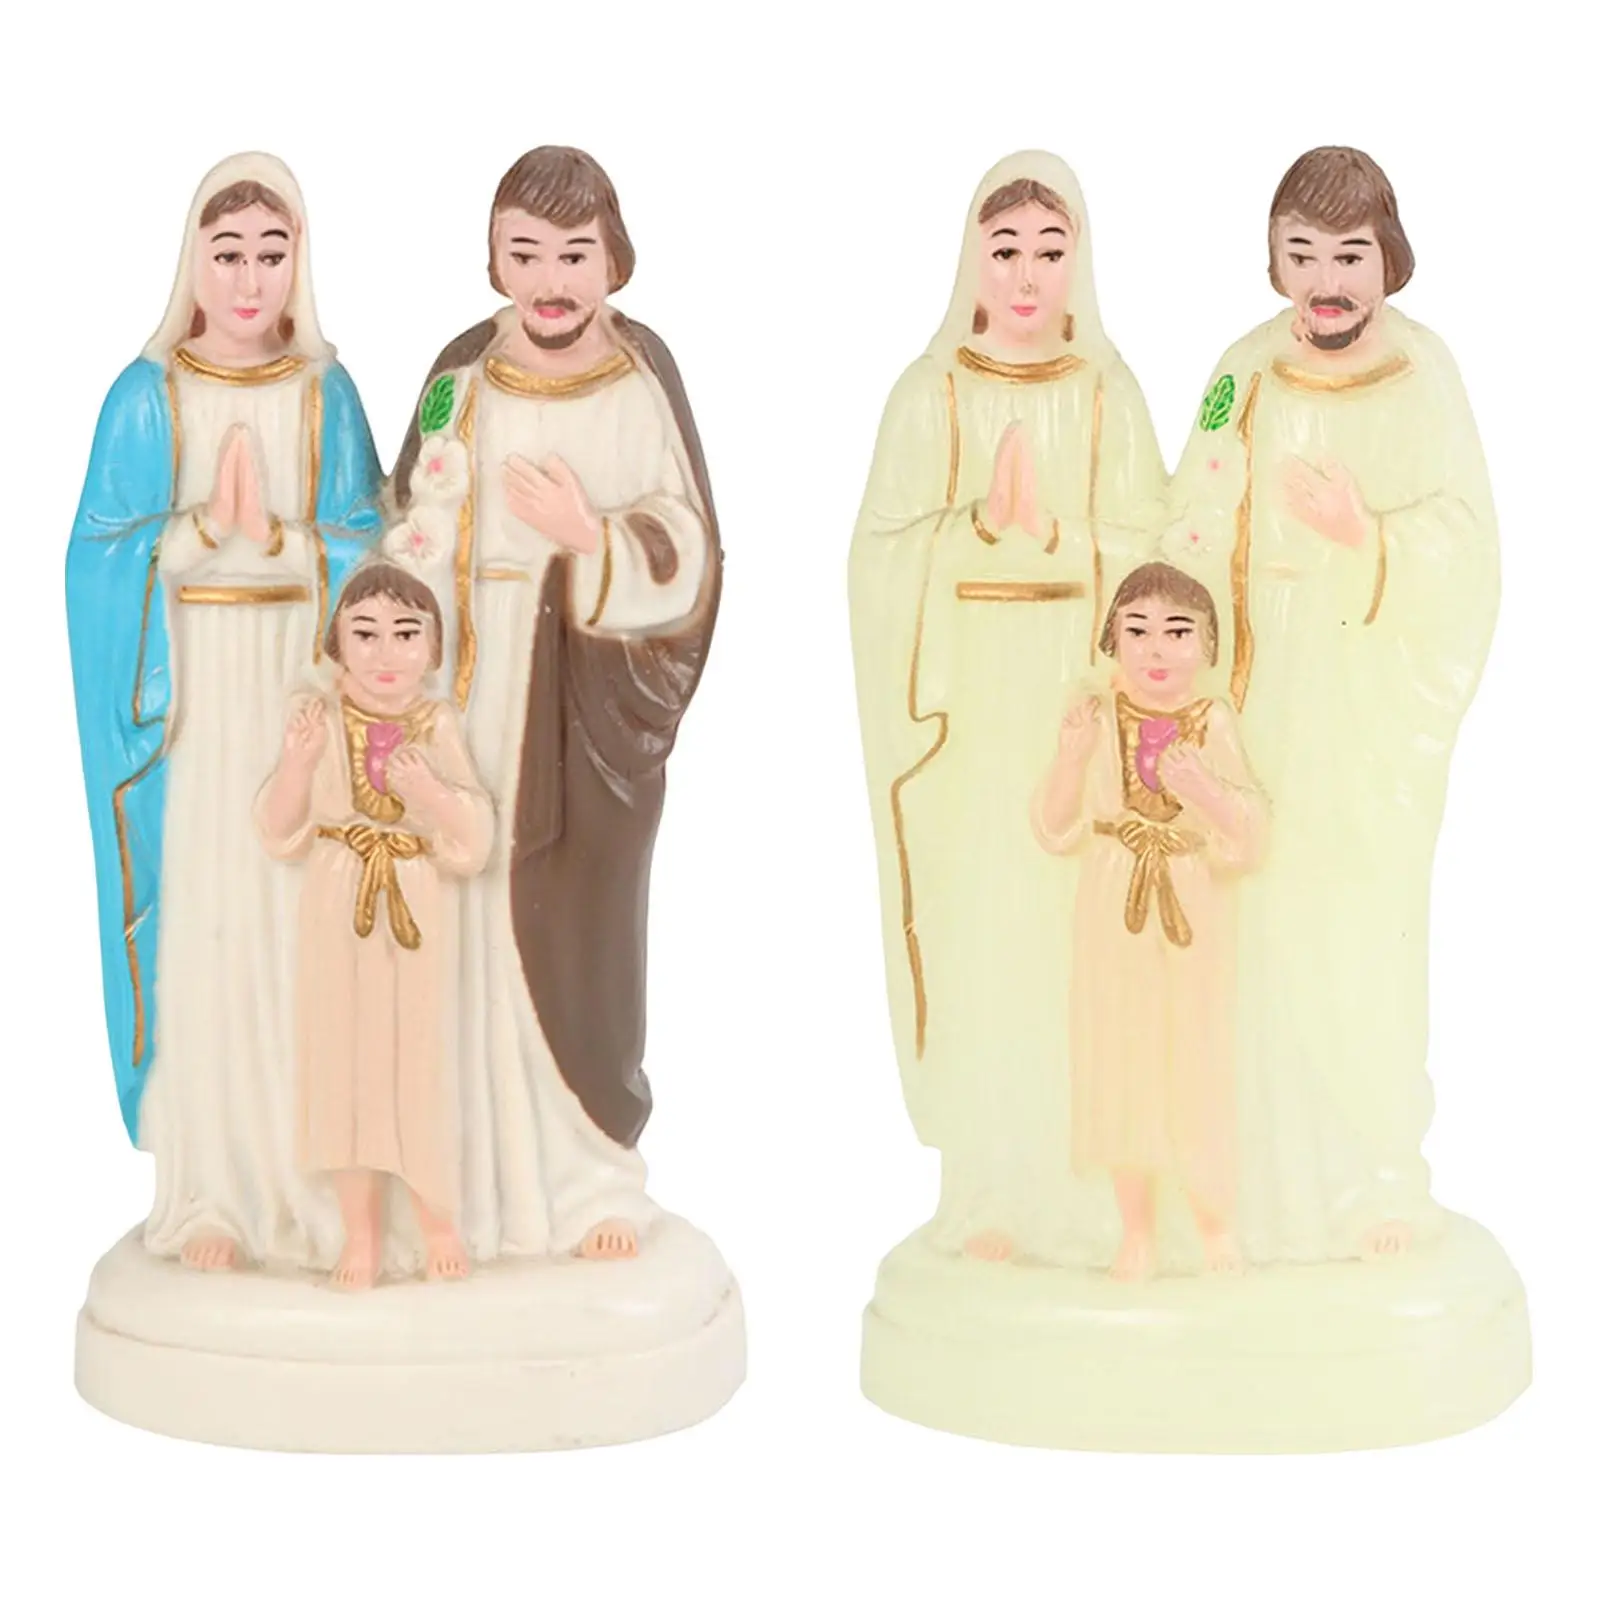 Holy Family with Child Statue Religious Figurine Christian Catholic Ornament for Desktop